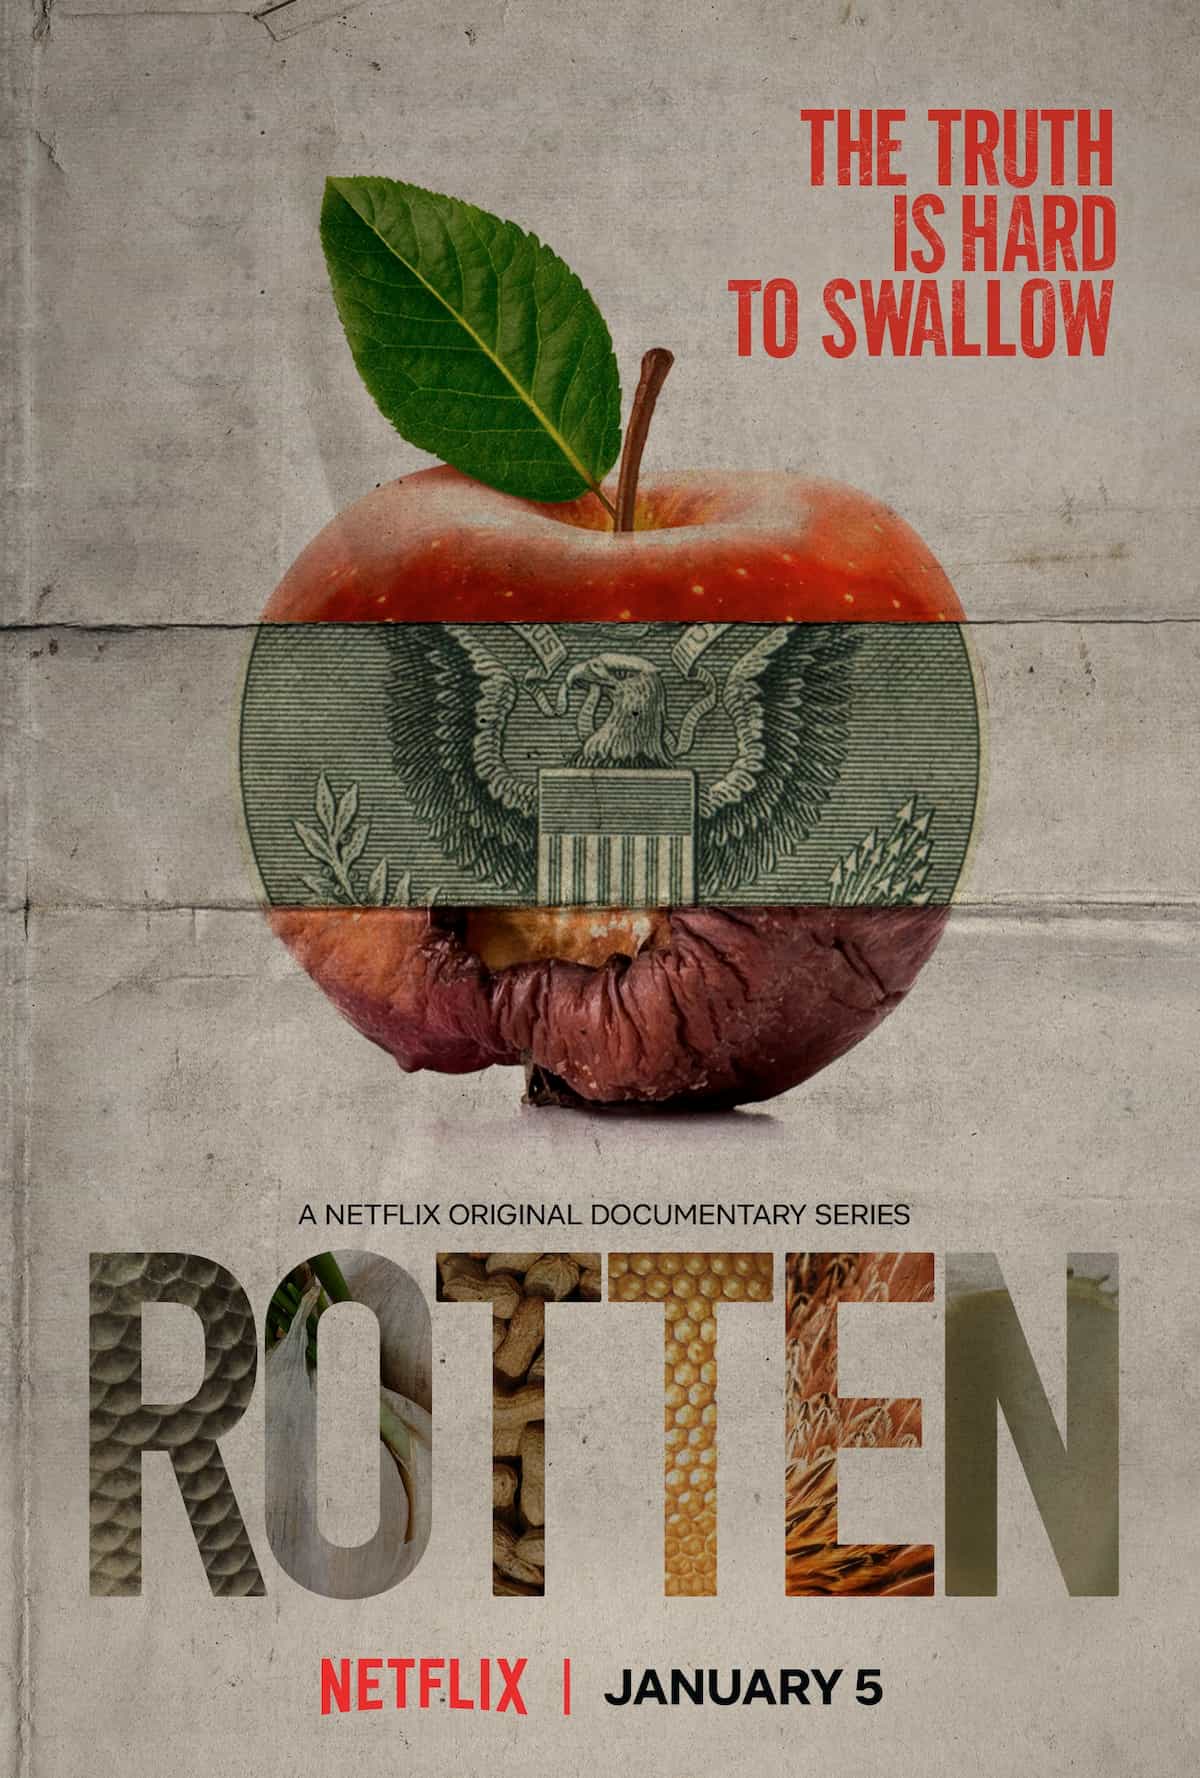 The poster for "Rotten" docuseries.